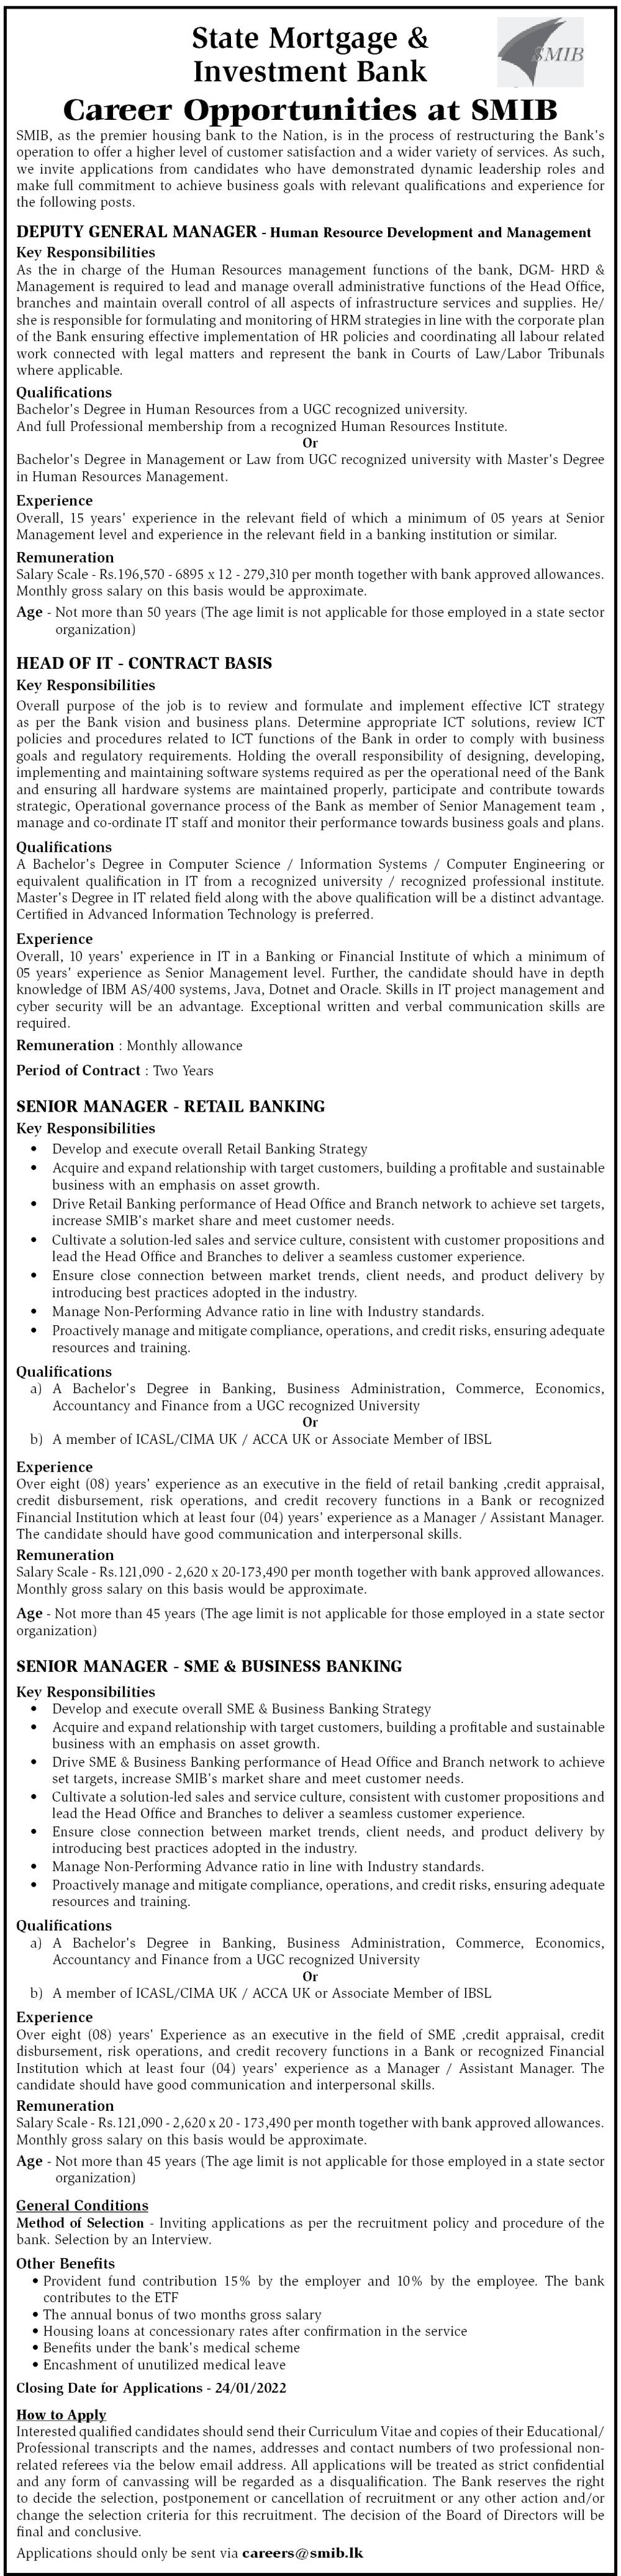 Deputy General Manager, Head of IT, Senior Manager - SMIB Bank